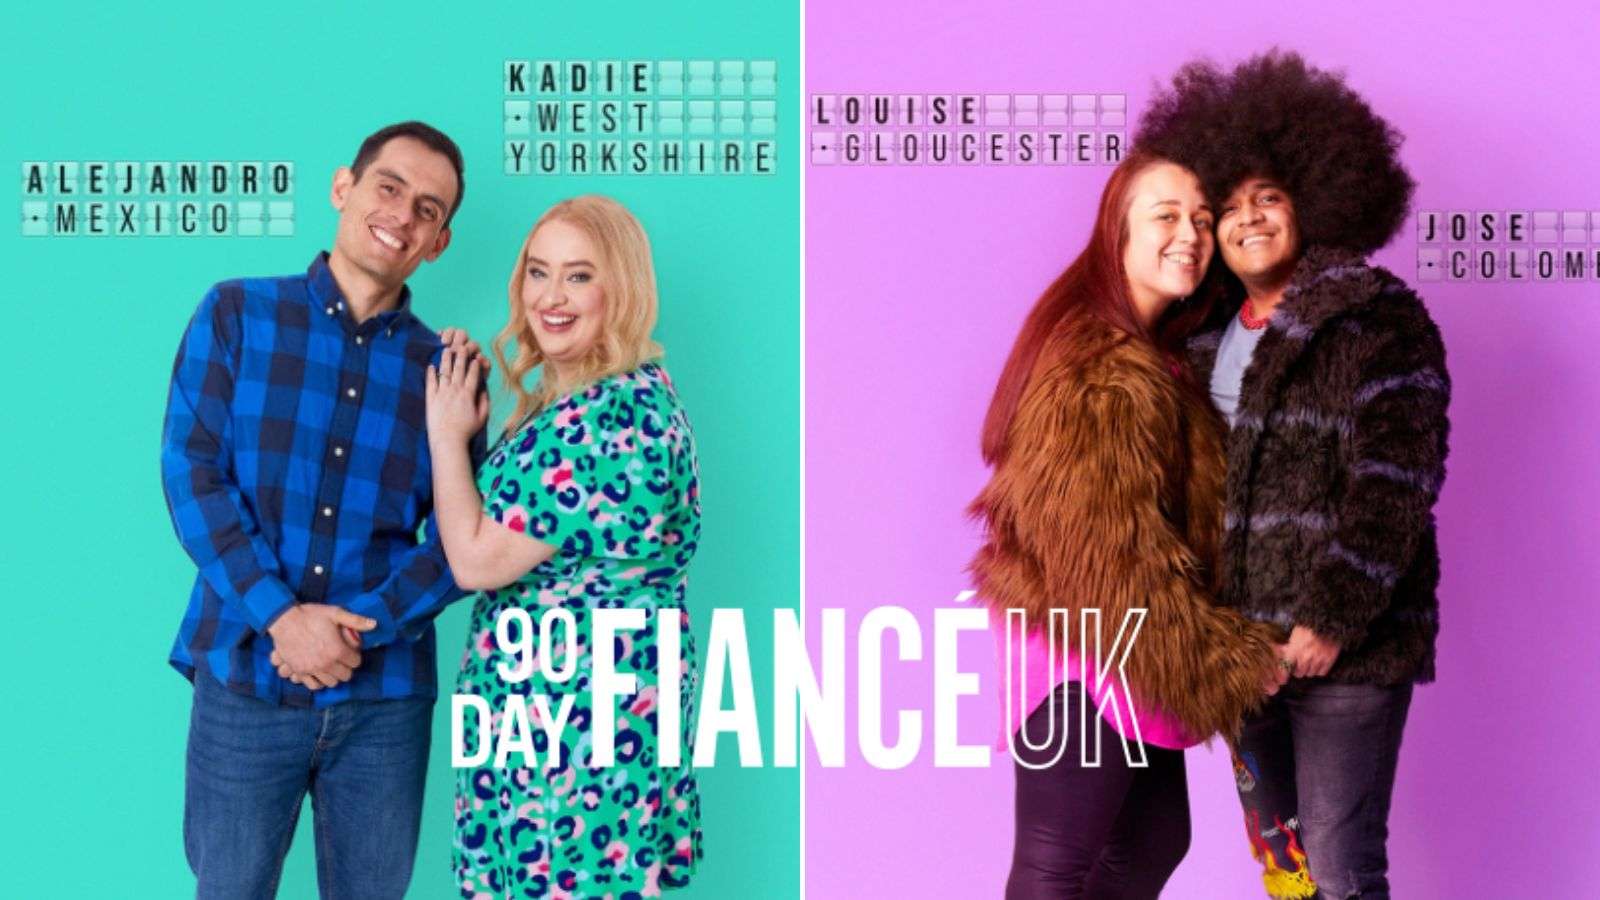 Alejandro, Kate, Jose, and Louise from 90 Day Fiancé UK Season 2